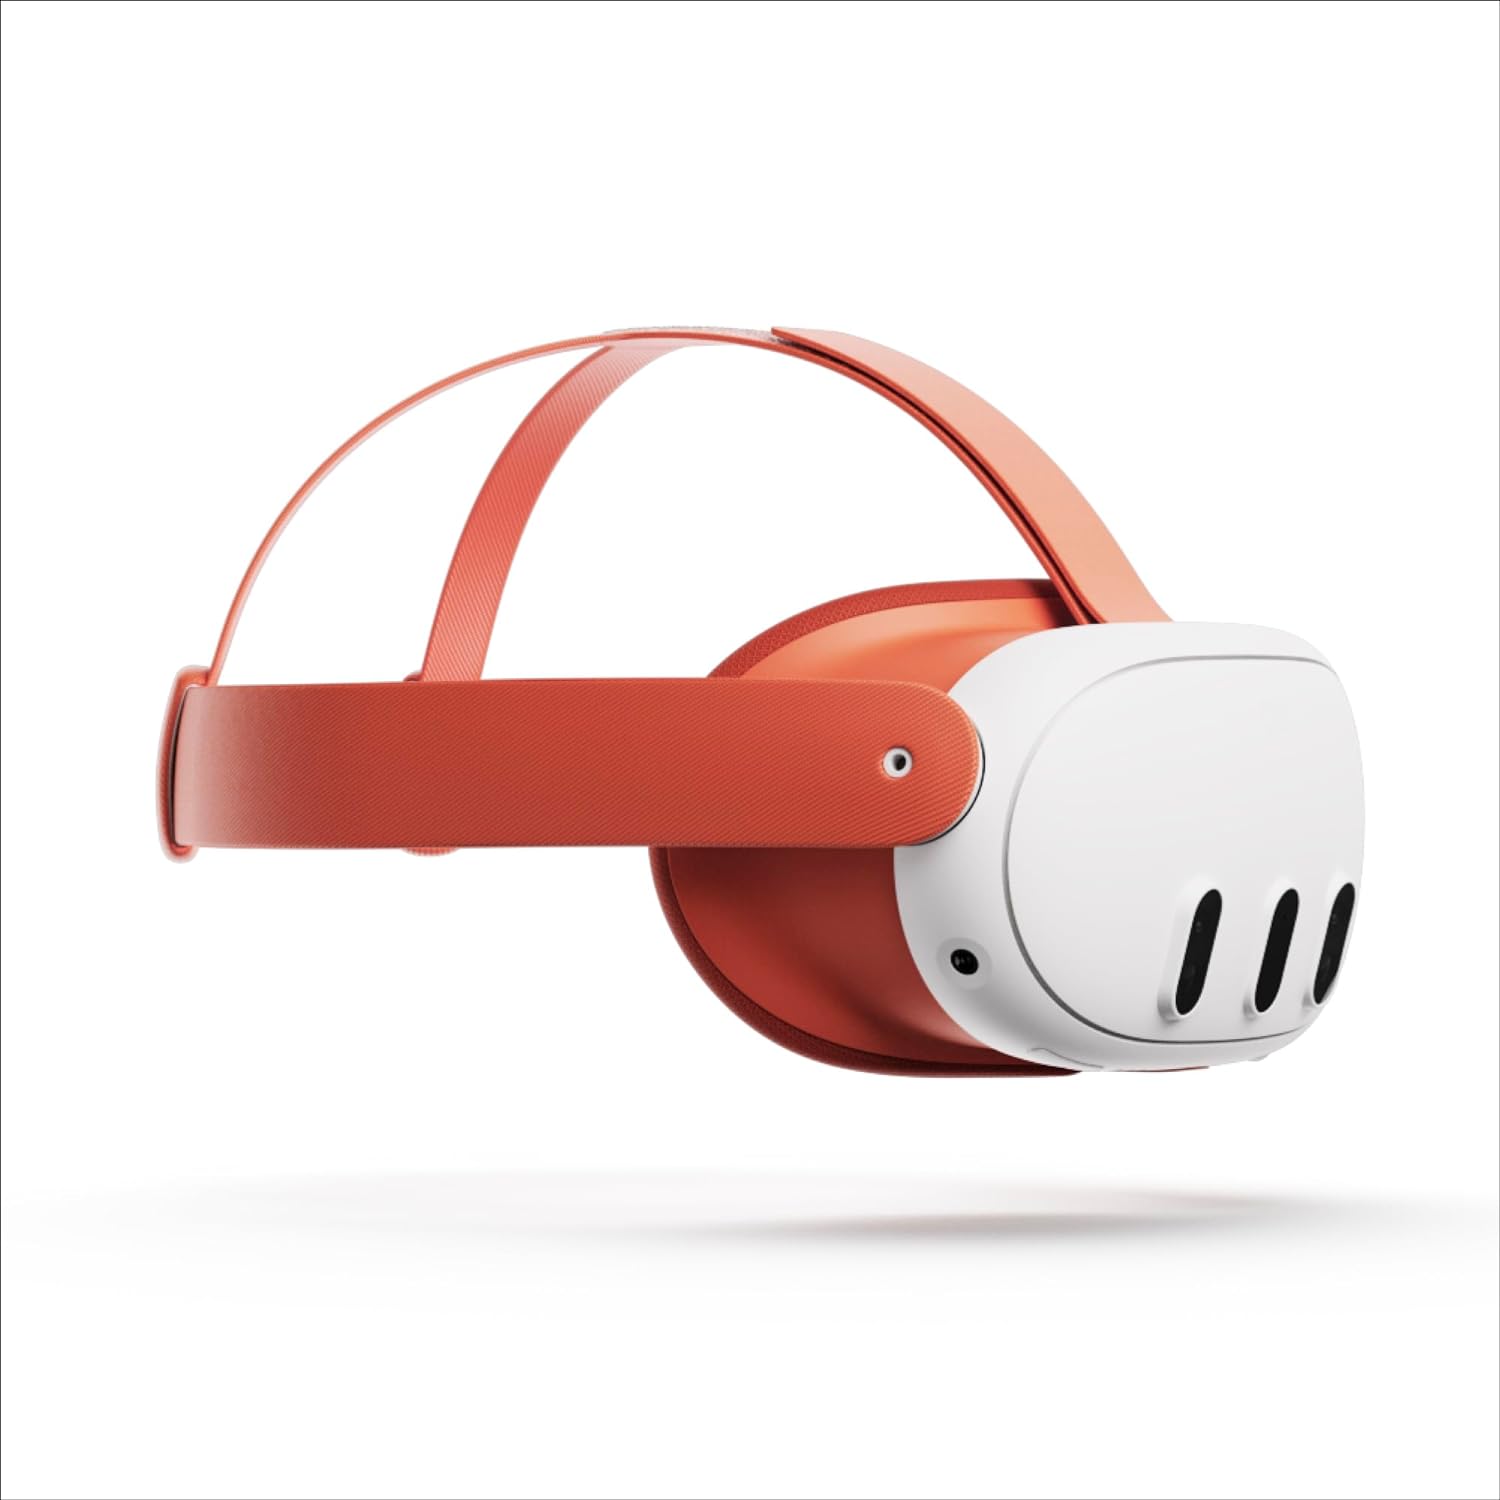 Meta Quest 3 Facial Interface and Head Strap - Blood Orange